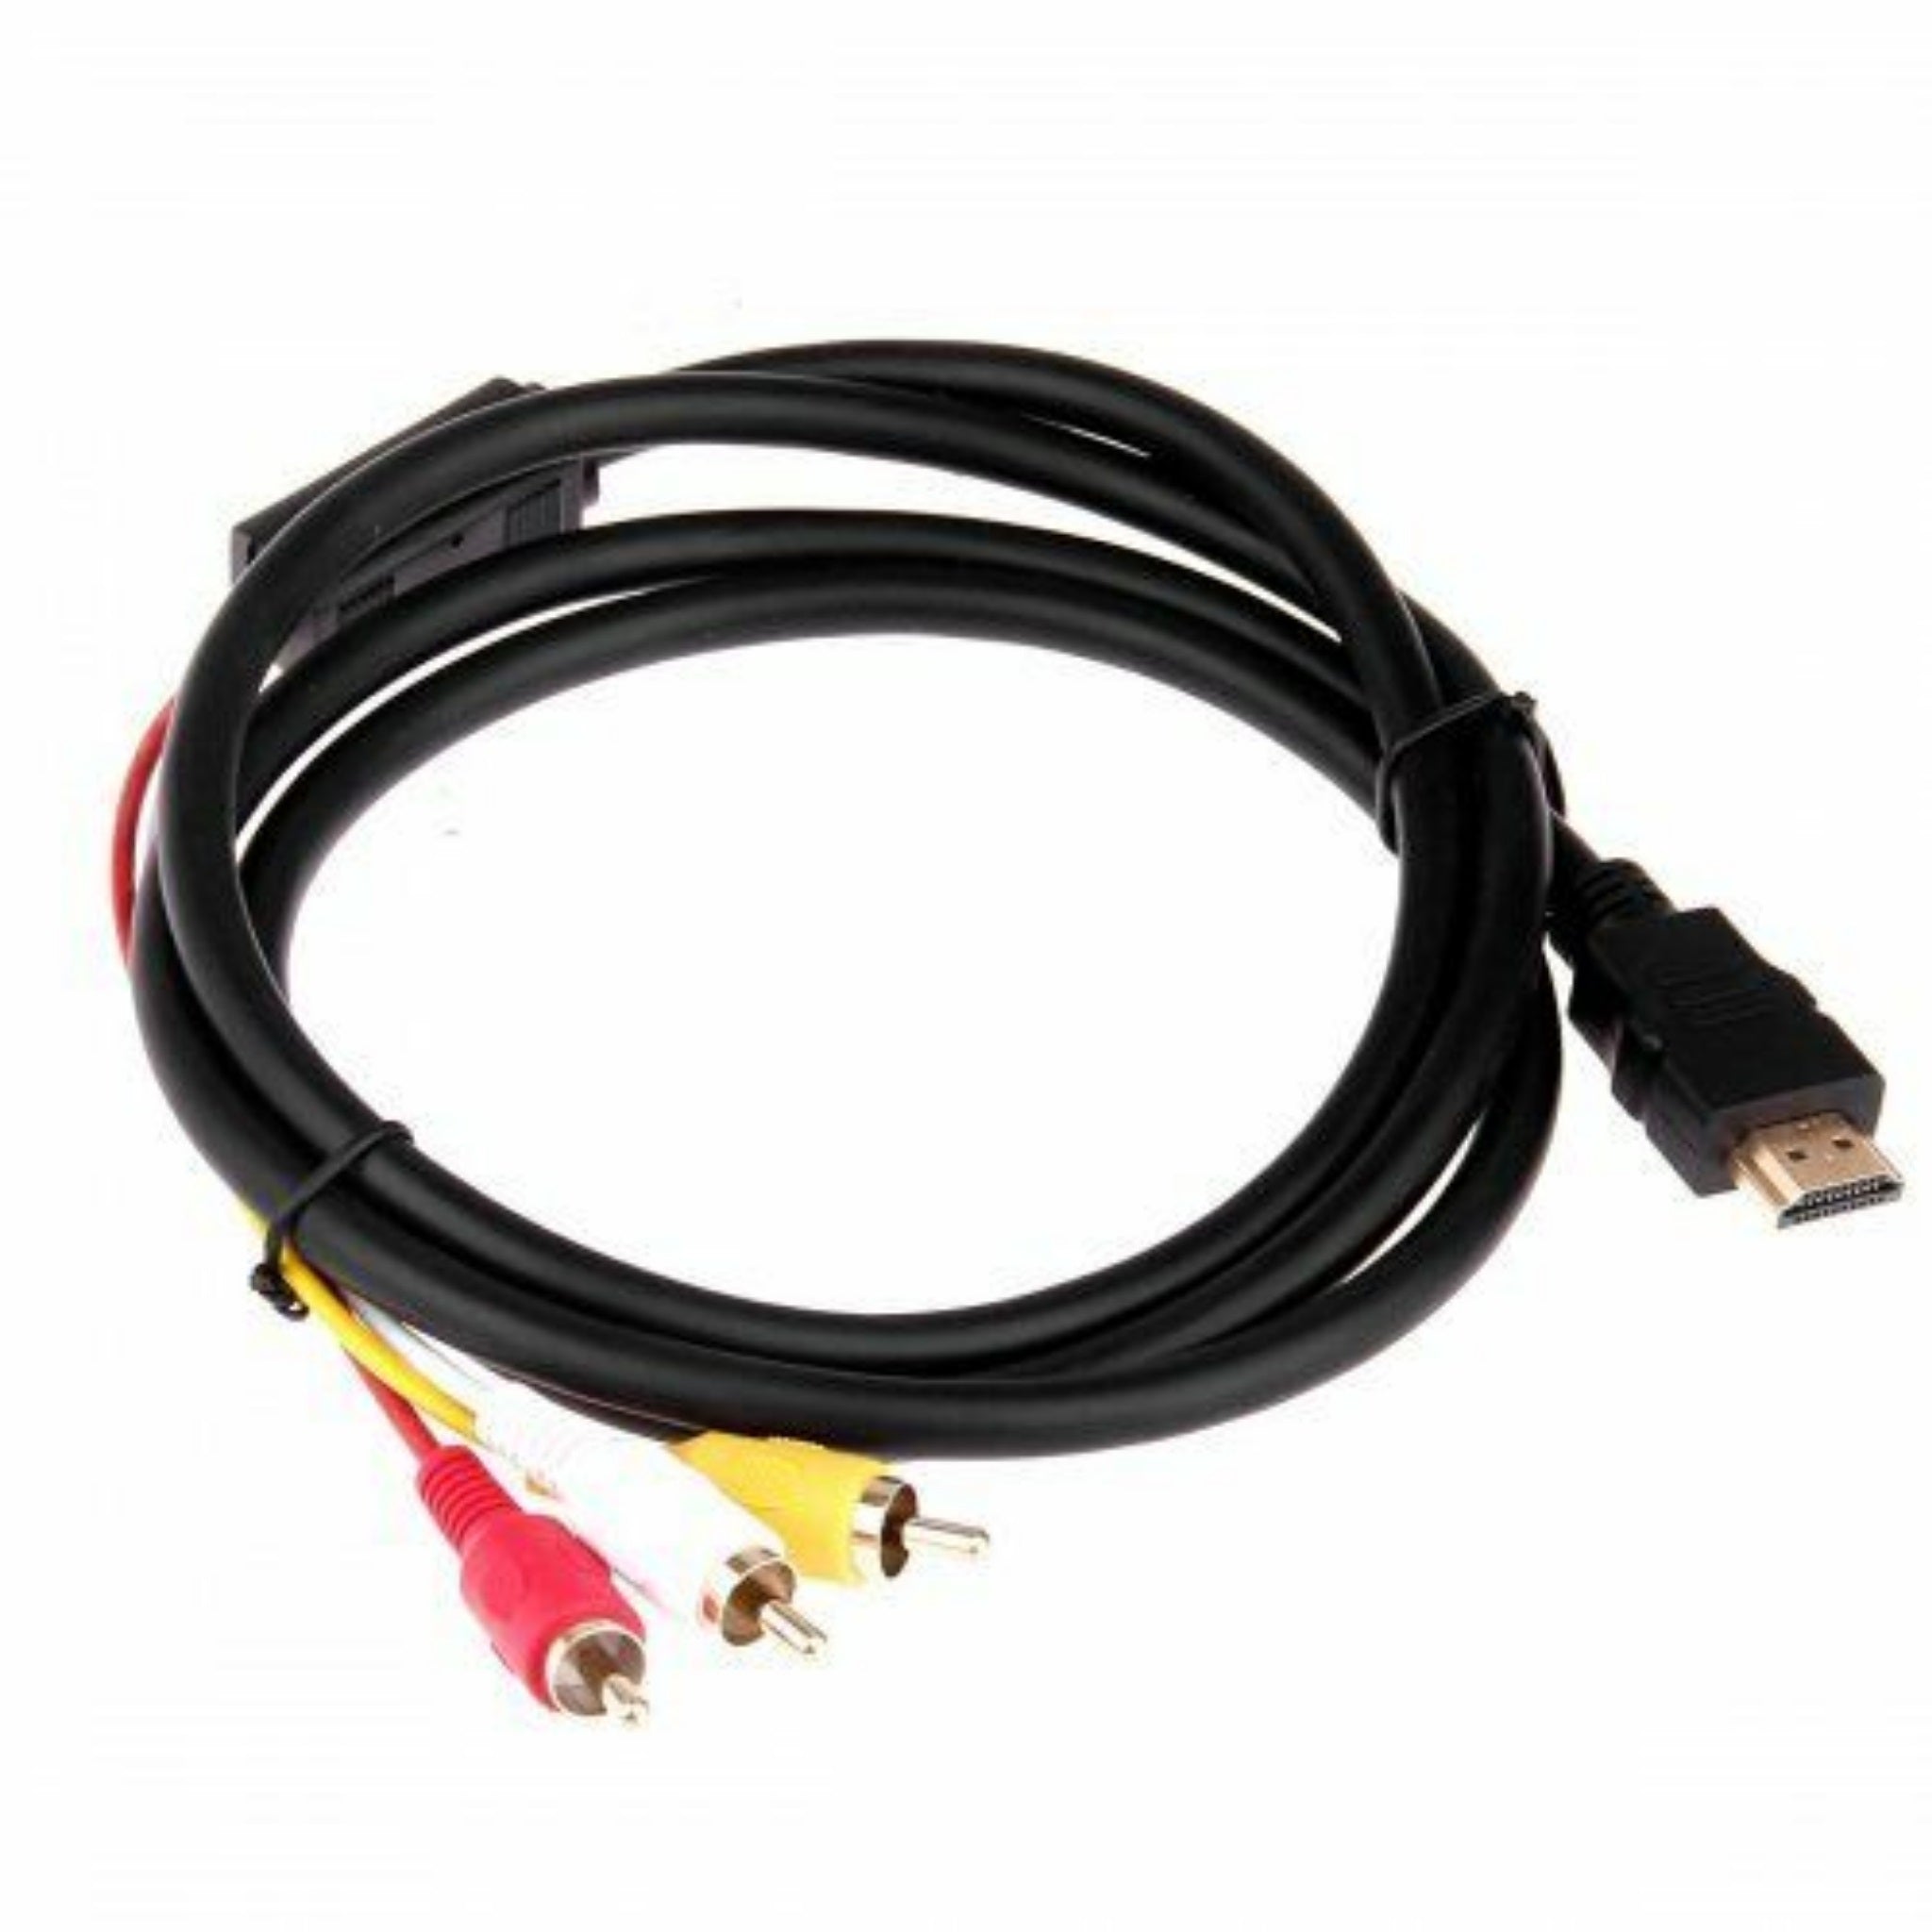 Beclen Harp 1.5m HDMI Male To 3 RCA Audio Video AV Cable Adapter Lead TV HDTV DVD 1080P UK